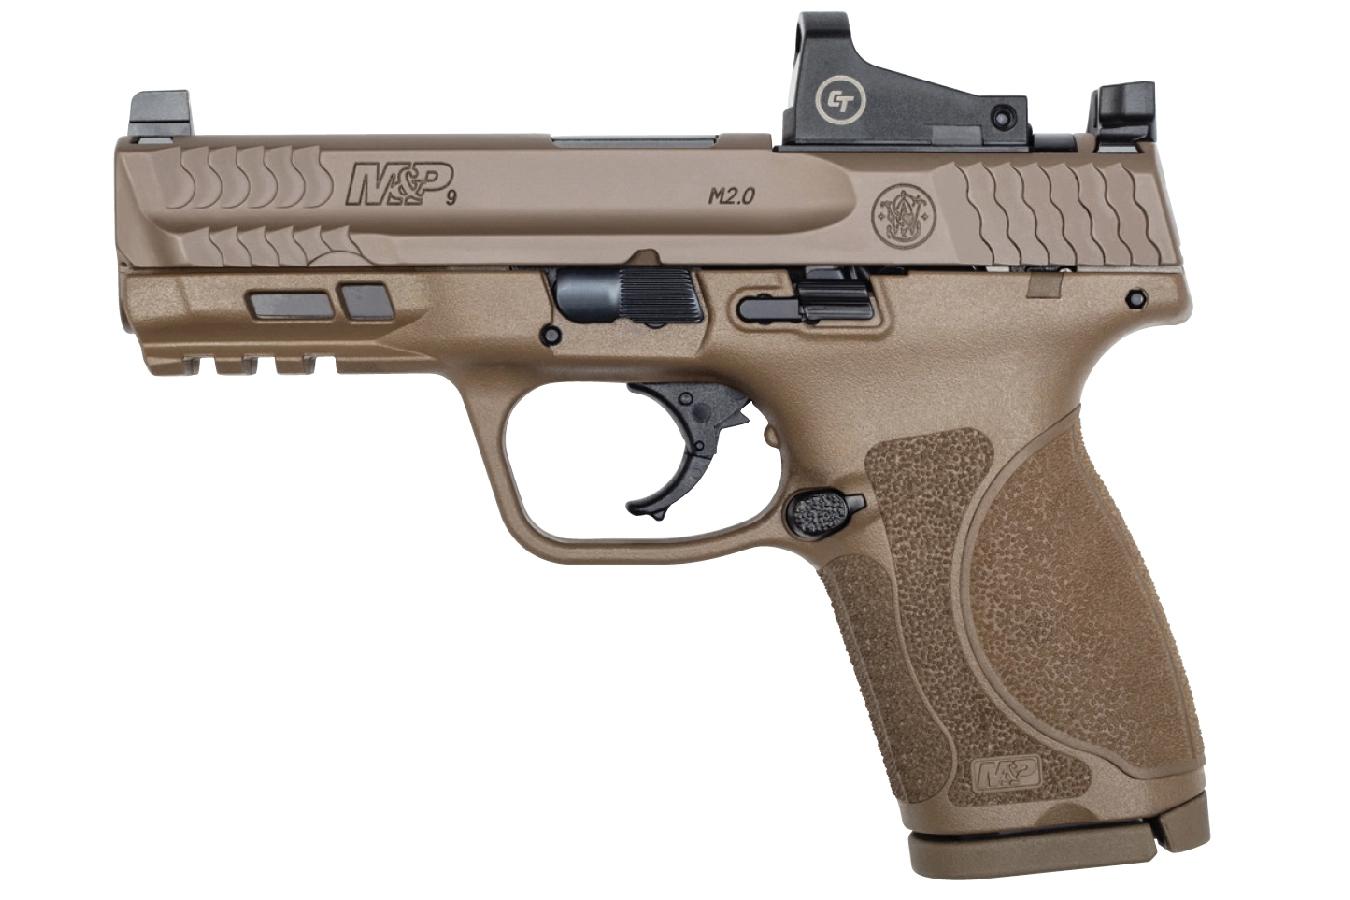 S&W M&P9 M2.0 Compact 9mm FDE Pistol with Crimson Trace Red Dot Reflex Sight - $499.99 ($399.99 after $100 Rebate) (Free S/H on Firearms)